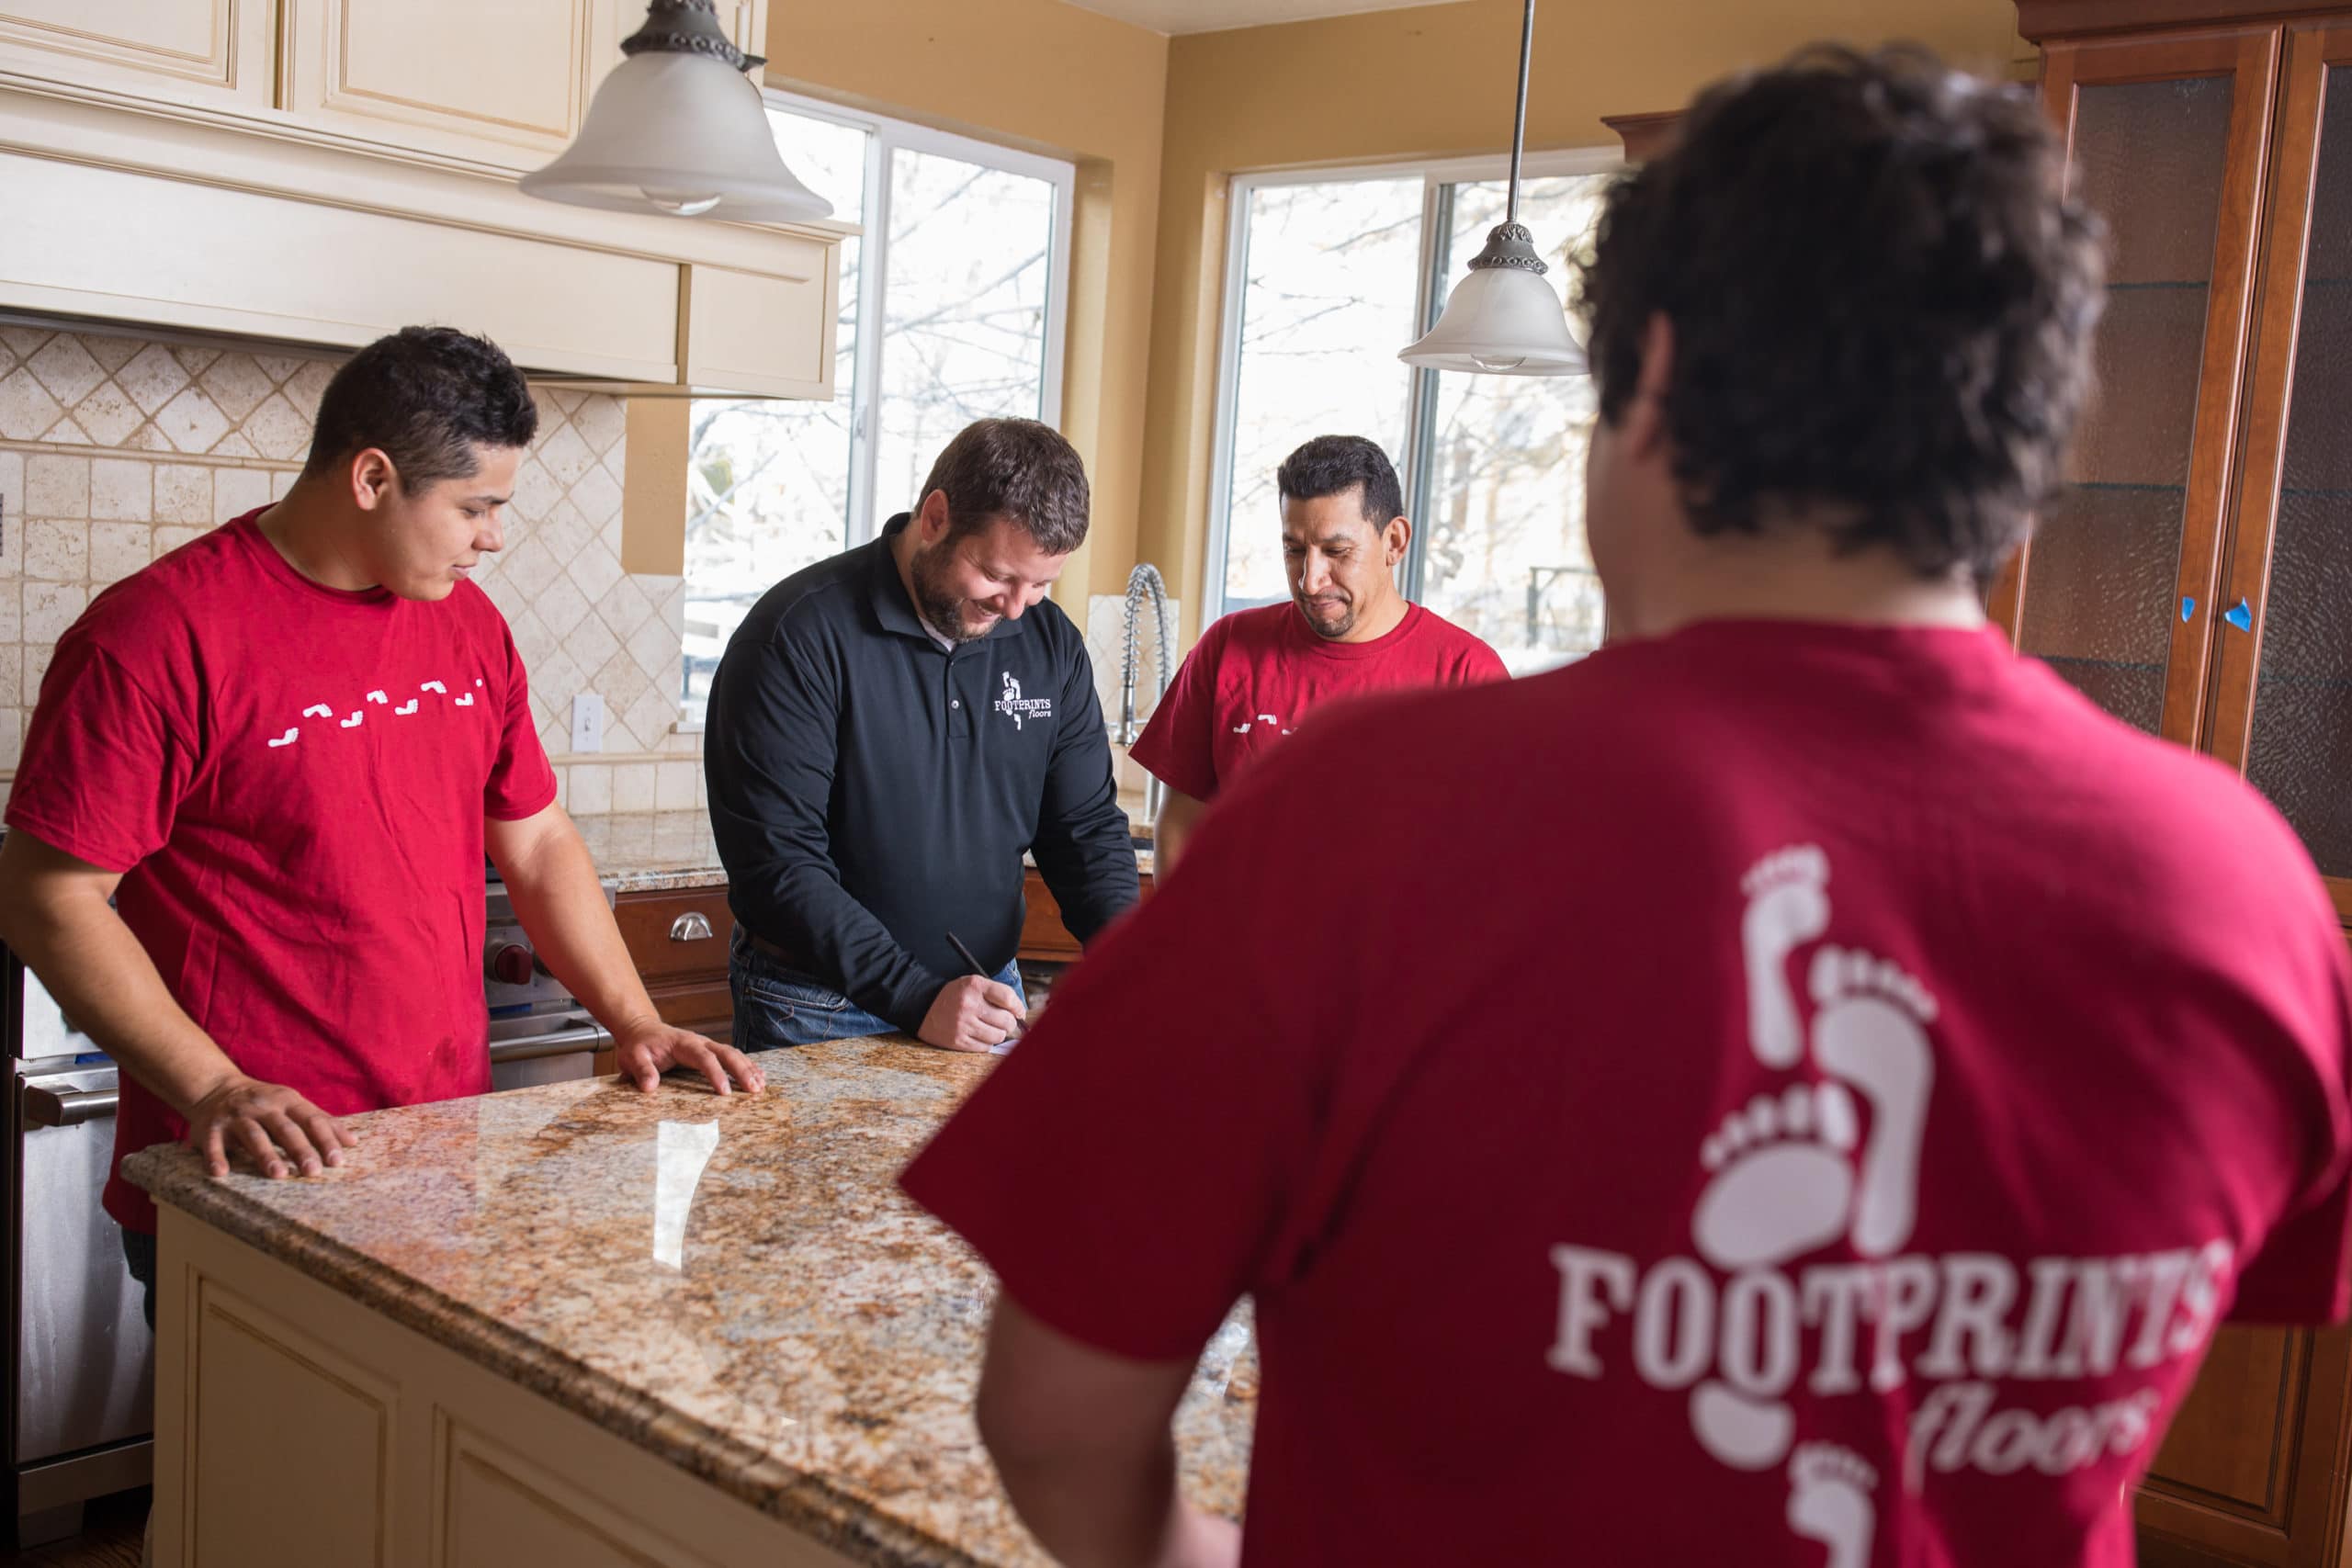 Constant support is a huge benefit of a home repair franchise with a Footprints Floors franchise.